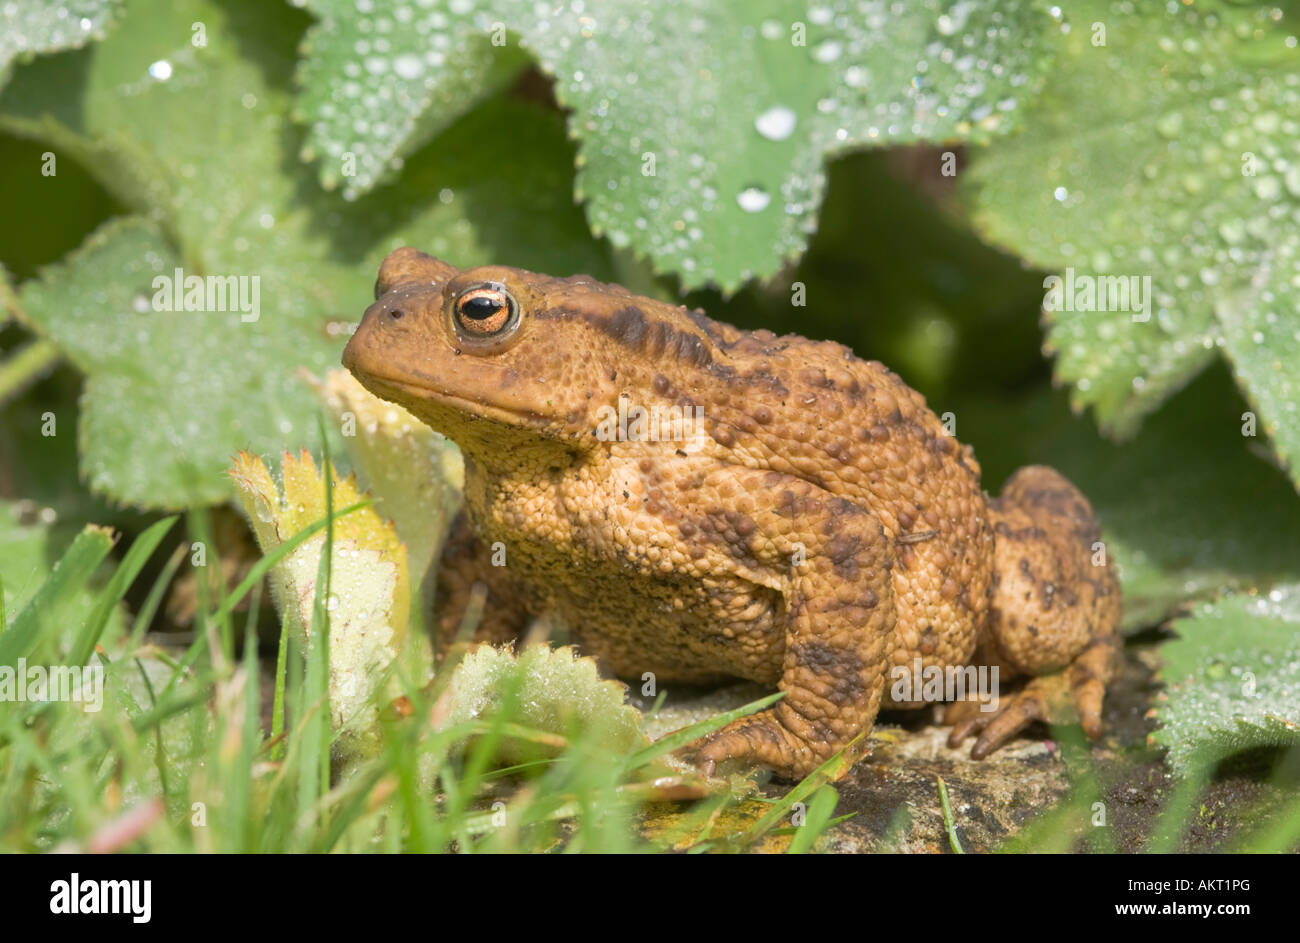 Common toad, Bufo bufo, large and warty on the ground under rain drop leaves, grass, Sussex UK Stock Photo